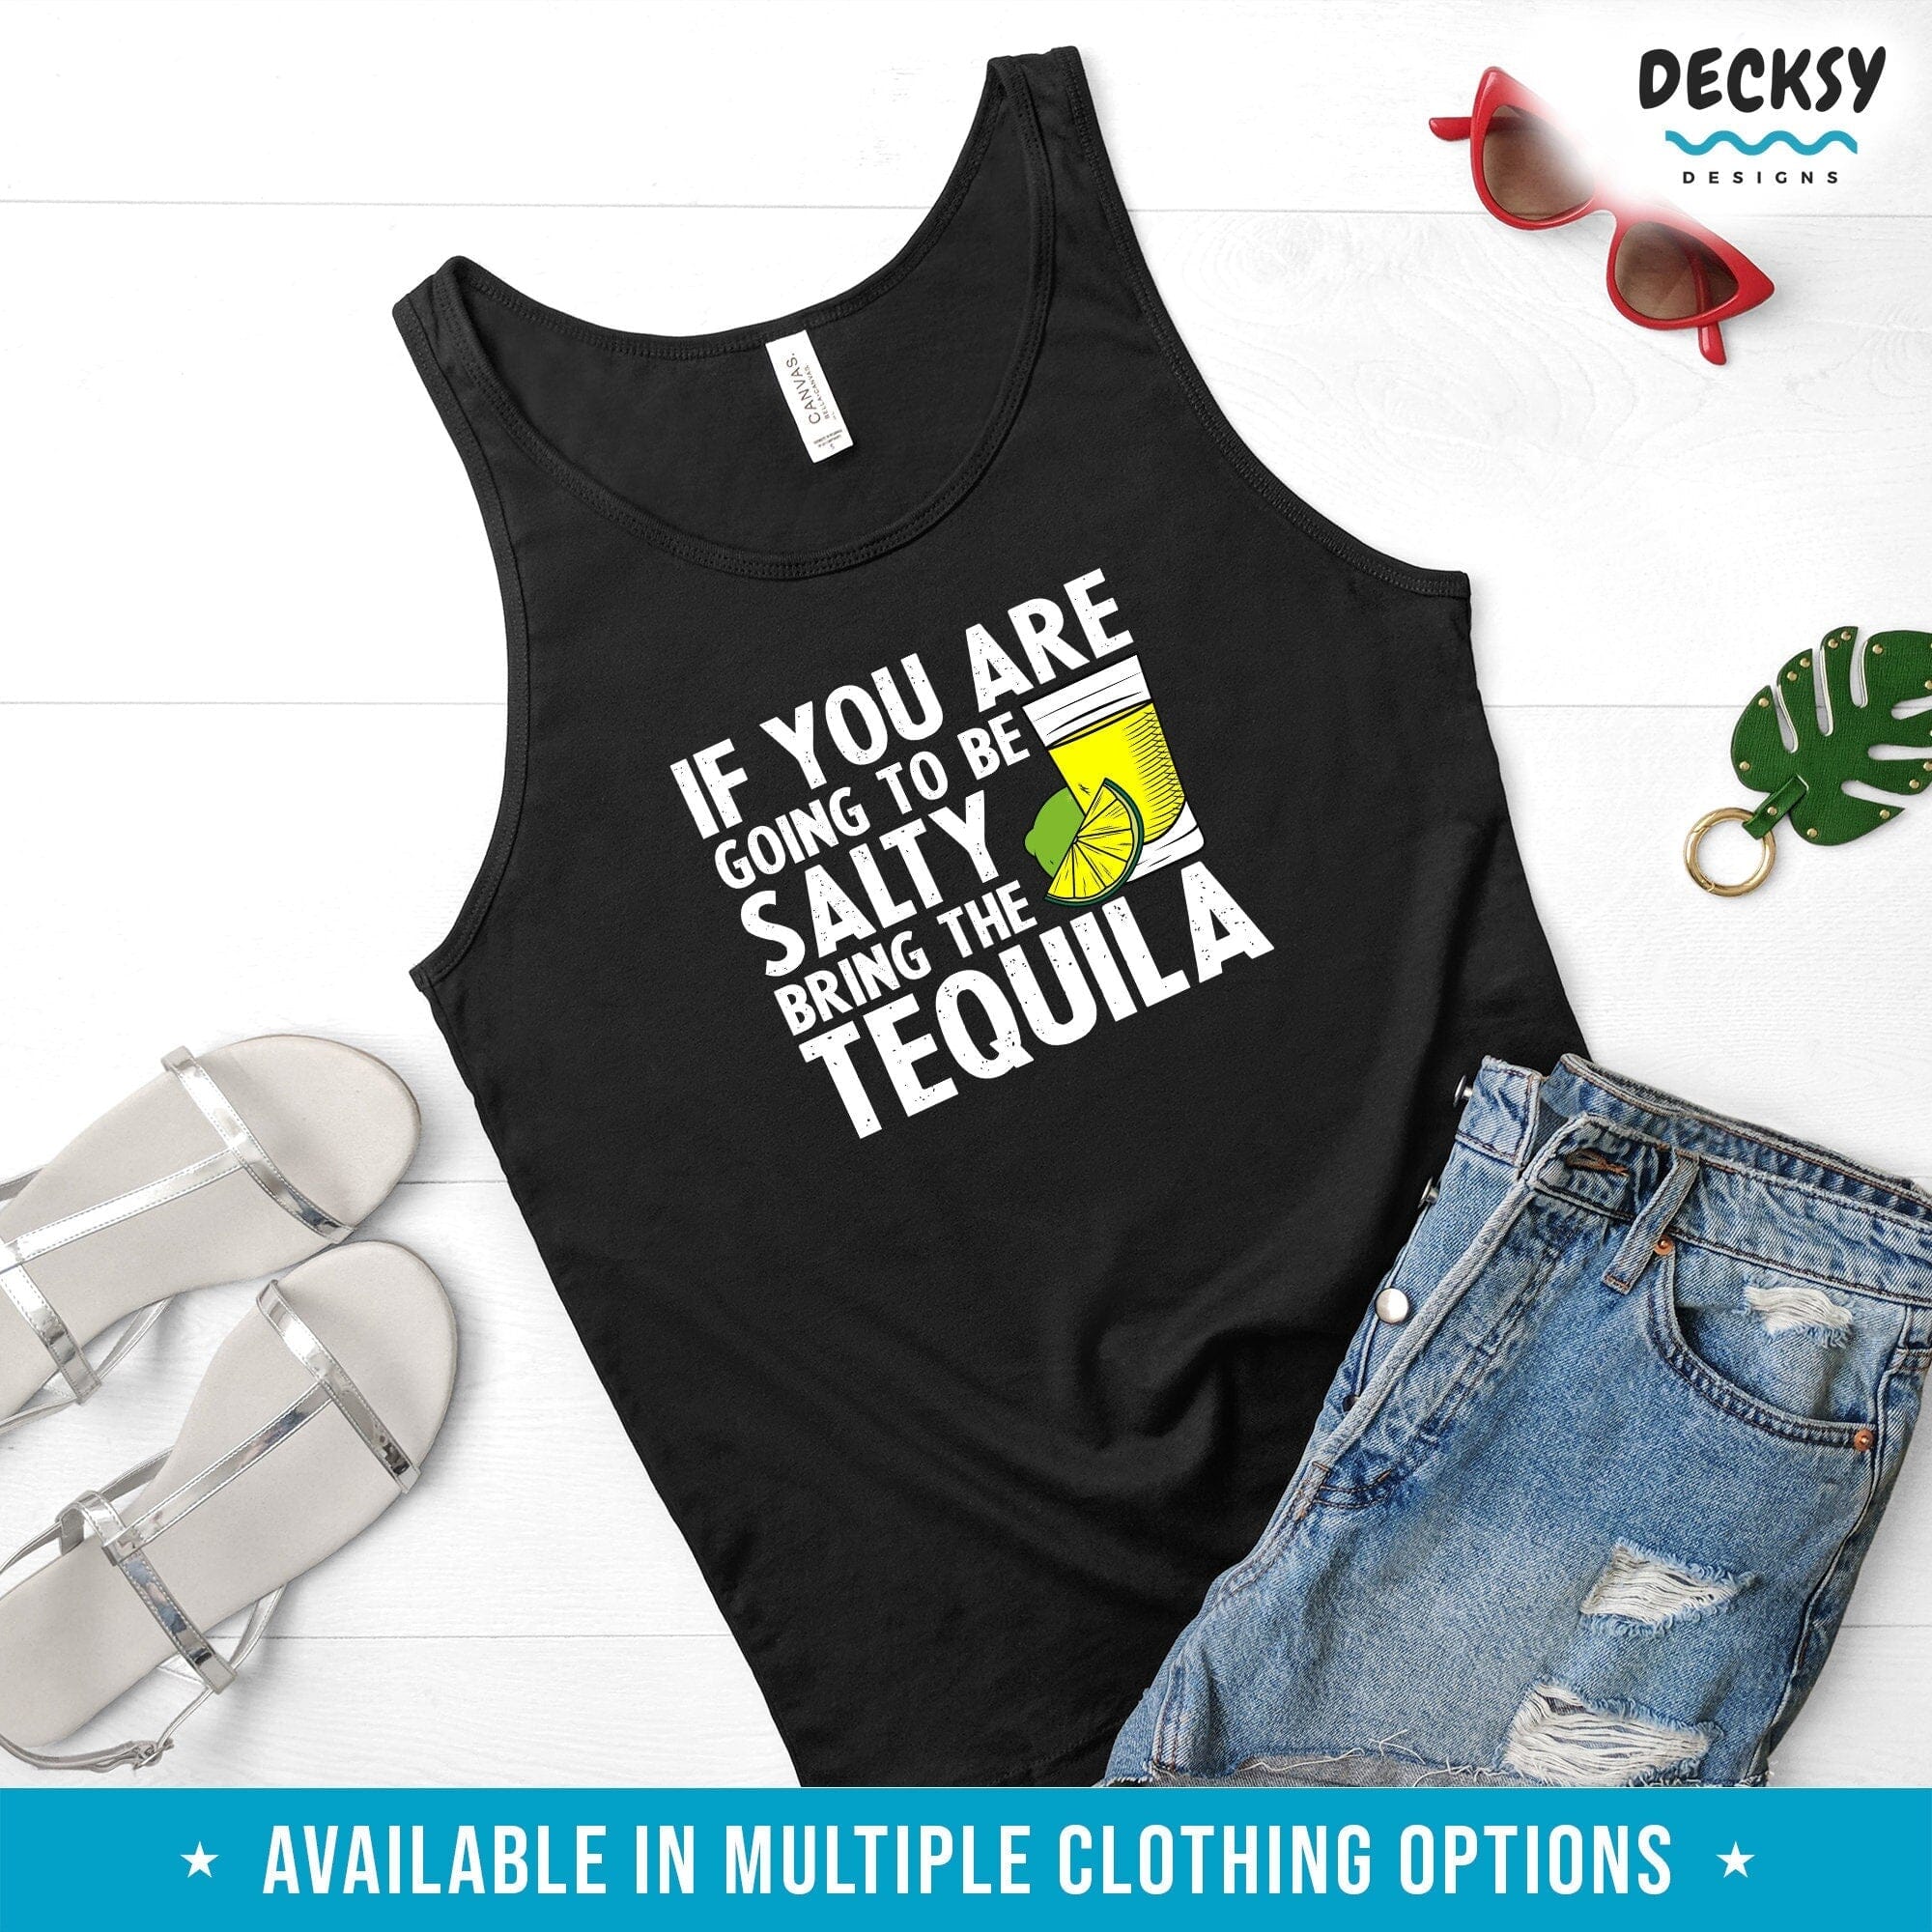 Tequila T Shirt, Sassy Party Gift-Clothing:Gender-Neutral Adult Clothing:Tops & Tees:T-shirts:Graphic Tees-DecksyDesigns